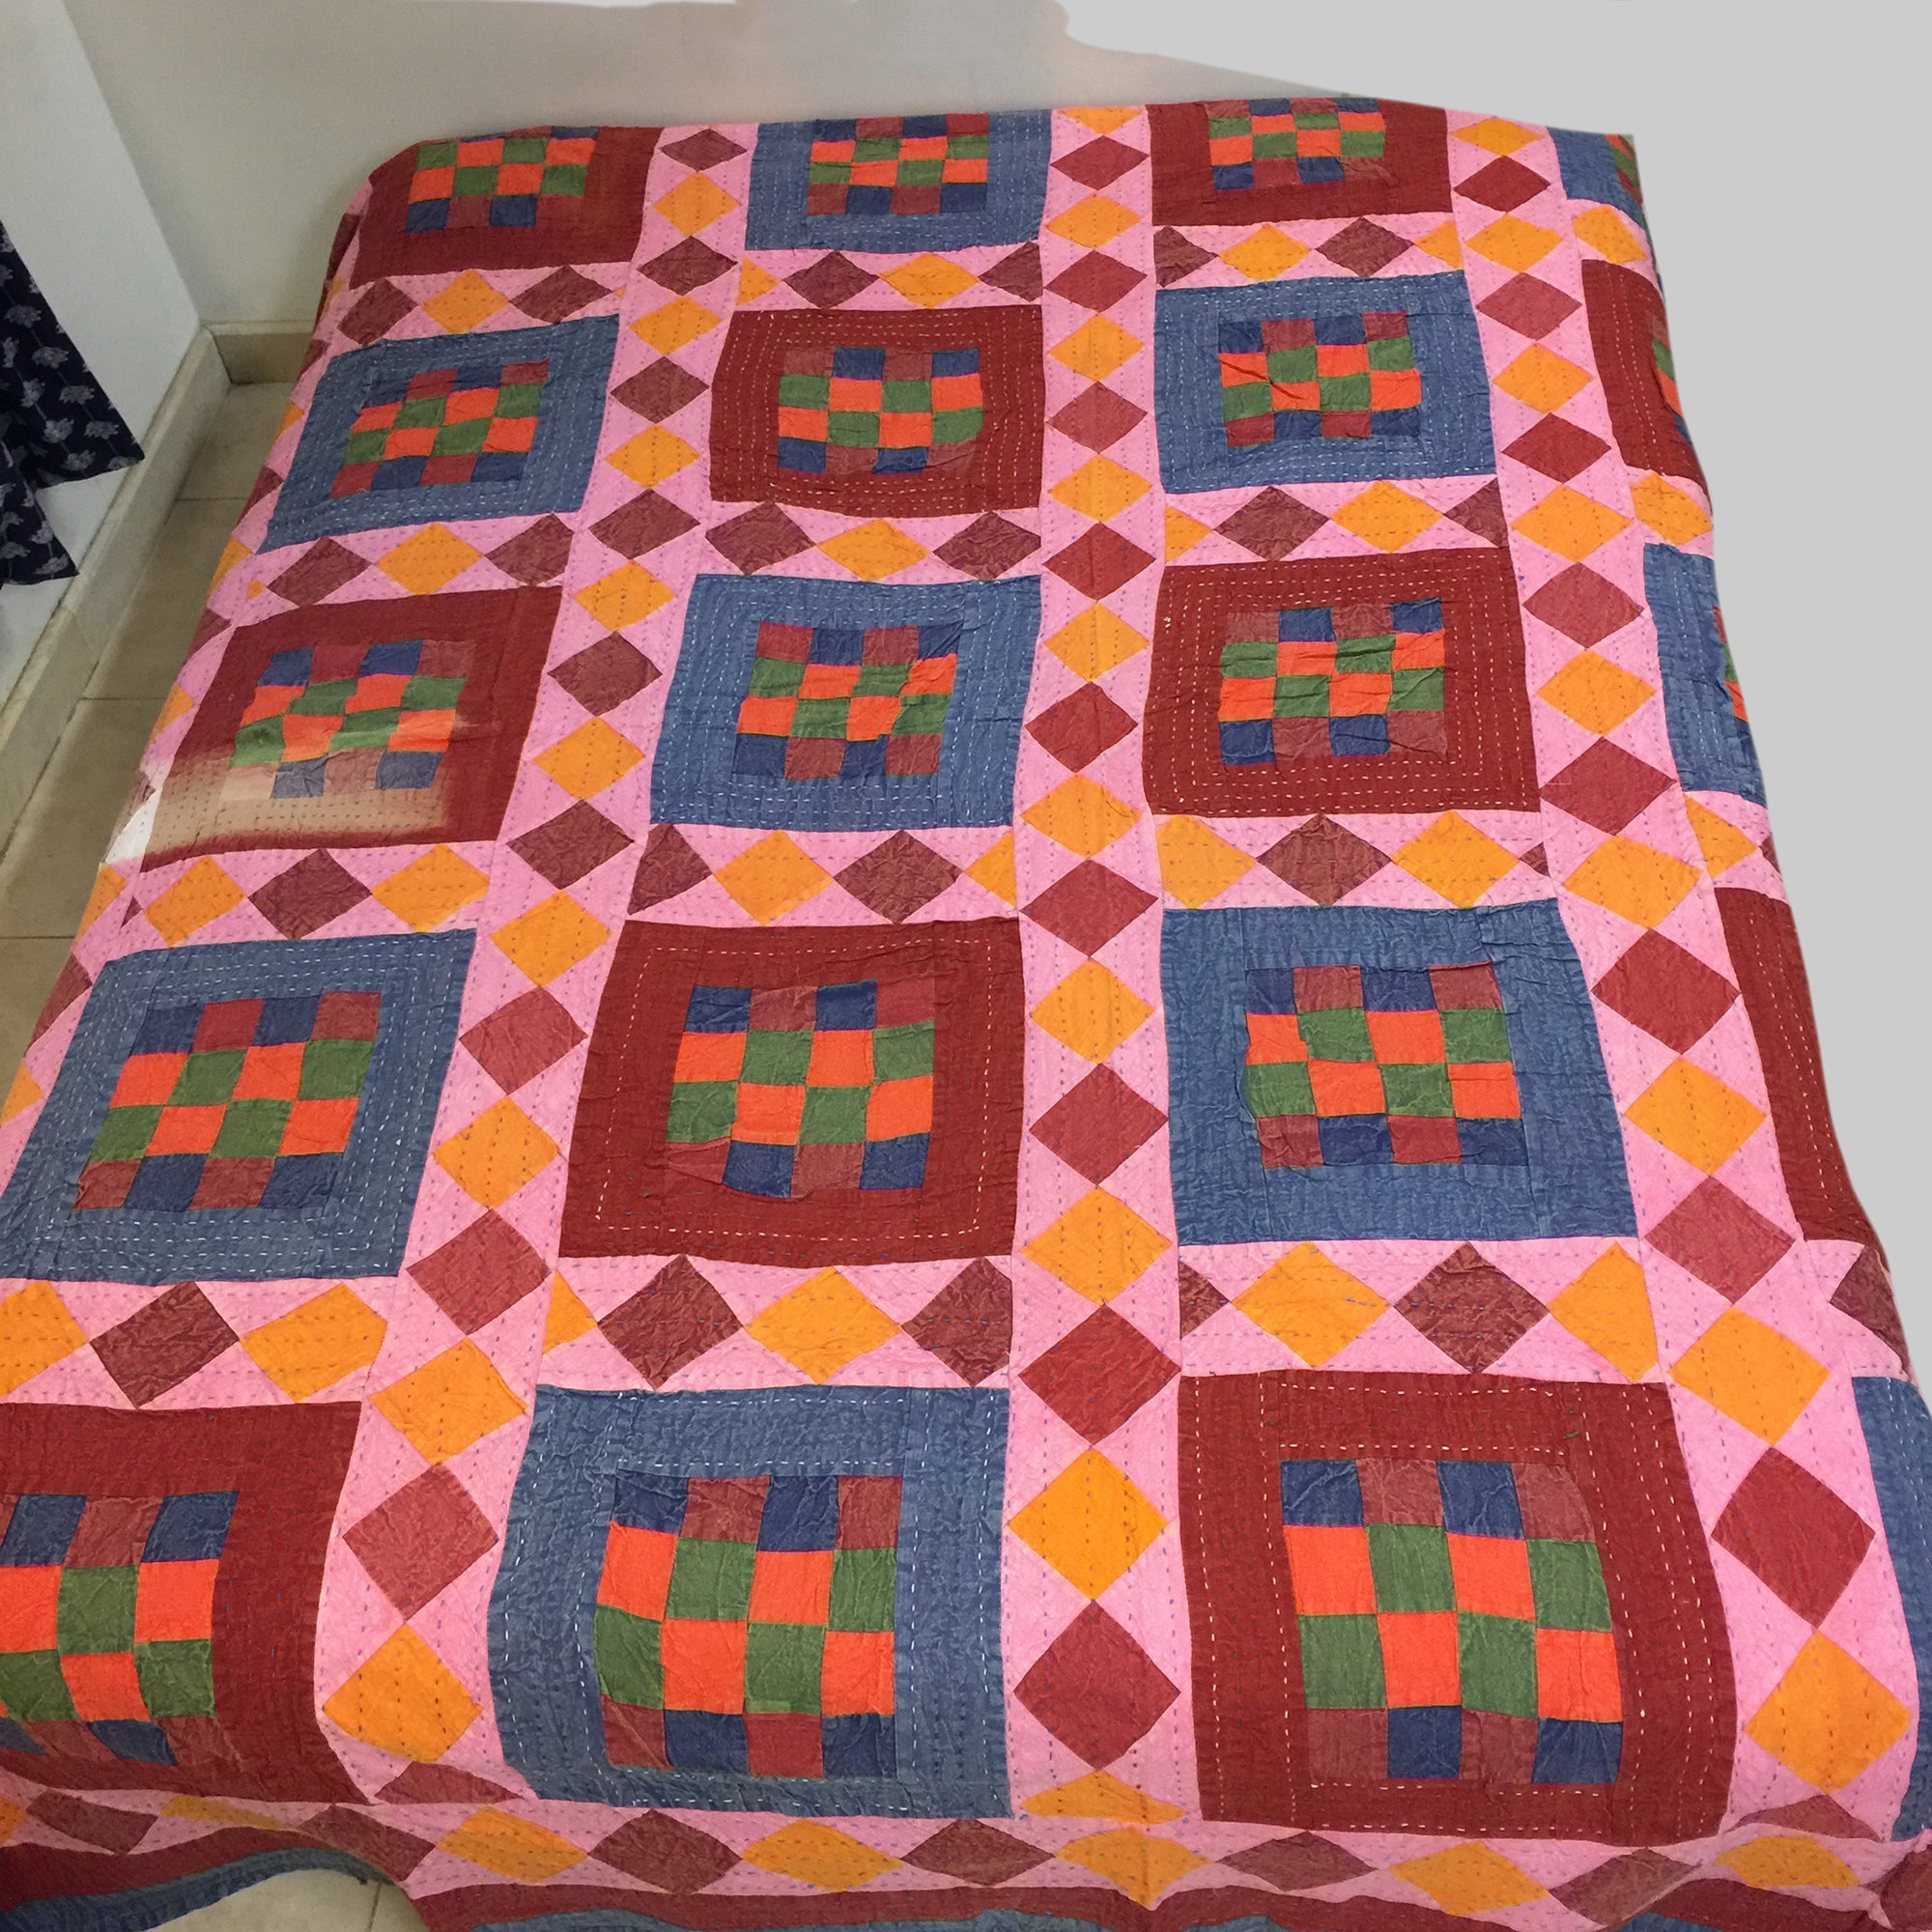 Checkered Patchwork Kantha Quilt-6 colors - Vintage India NYC